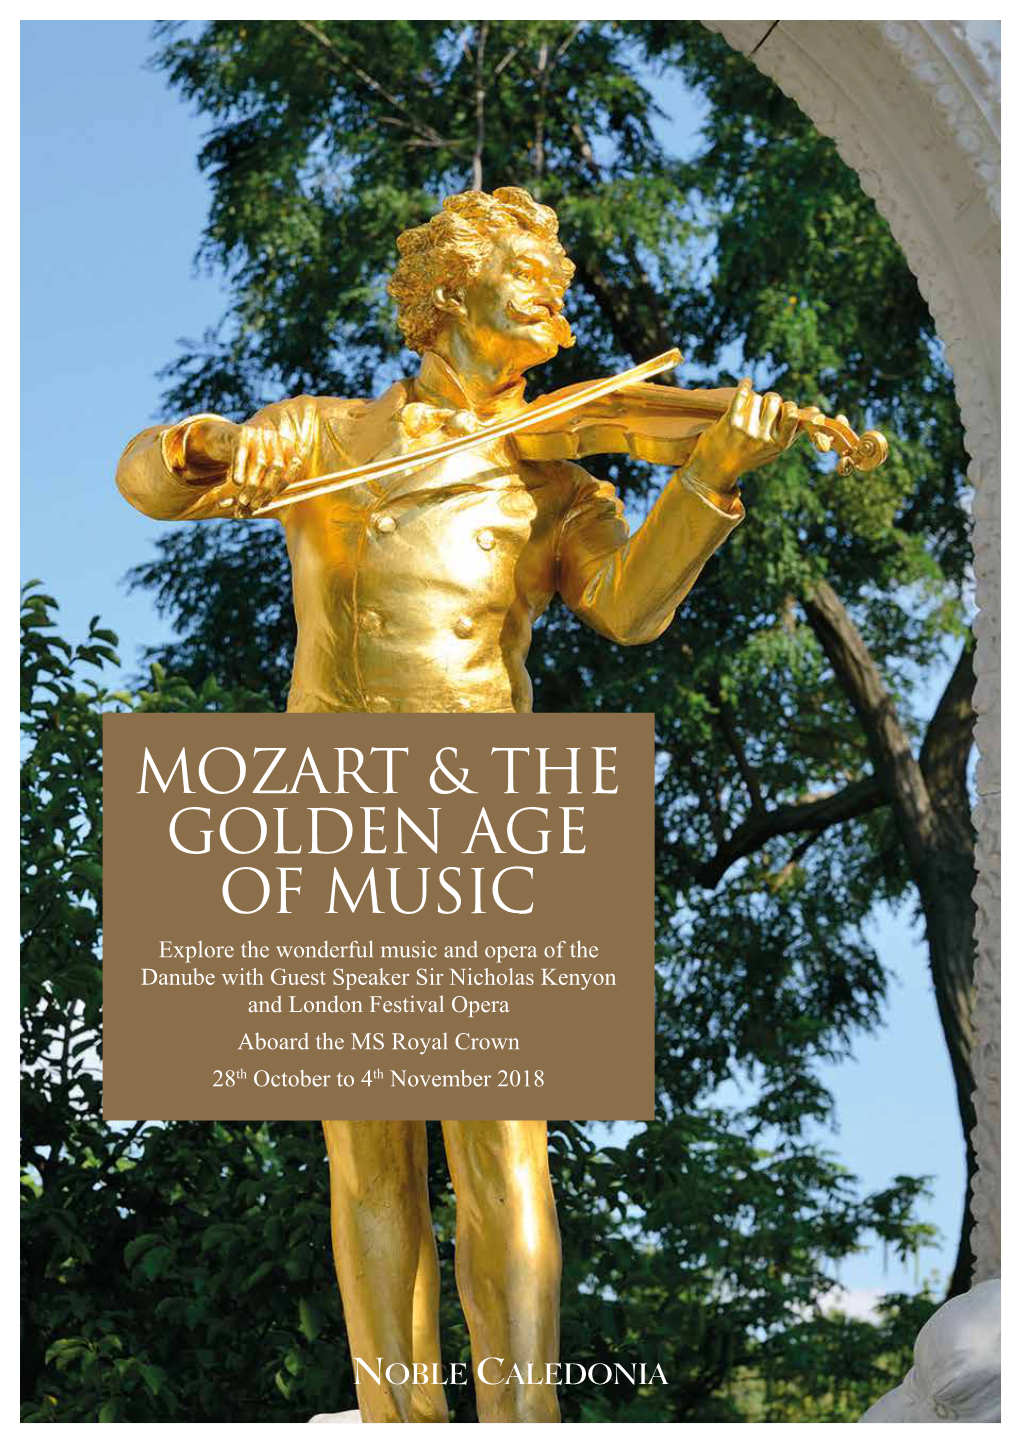 Mozart & the Golden Age of Music